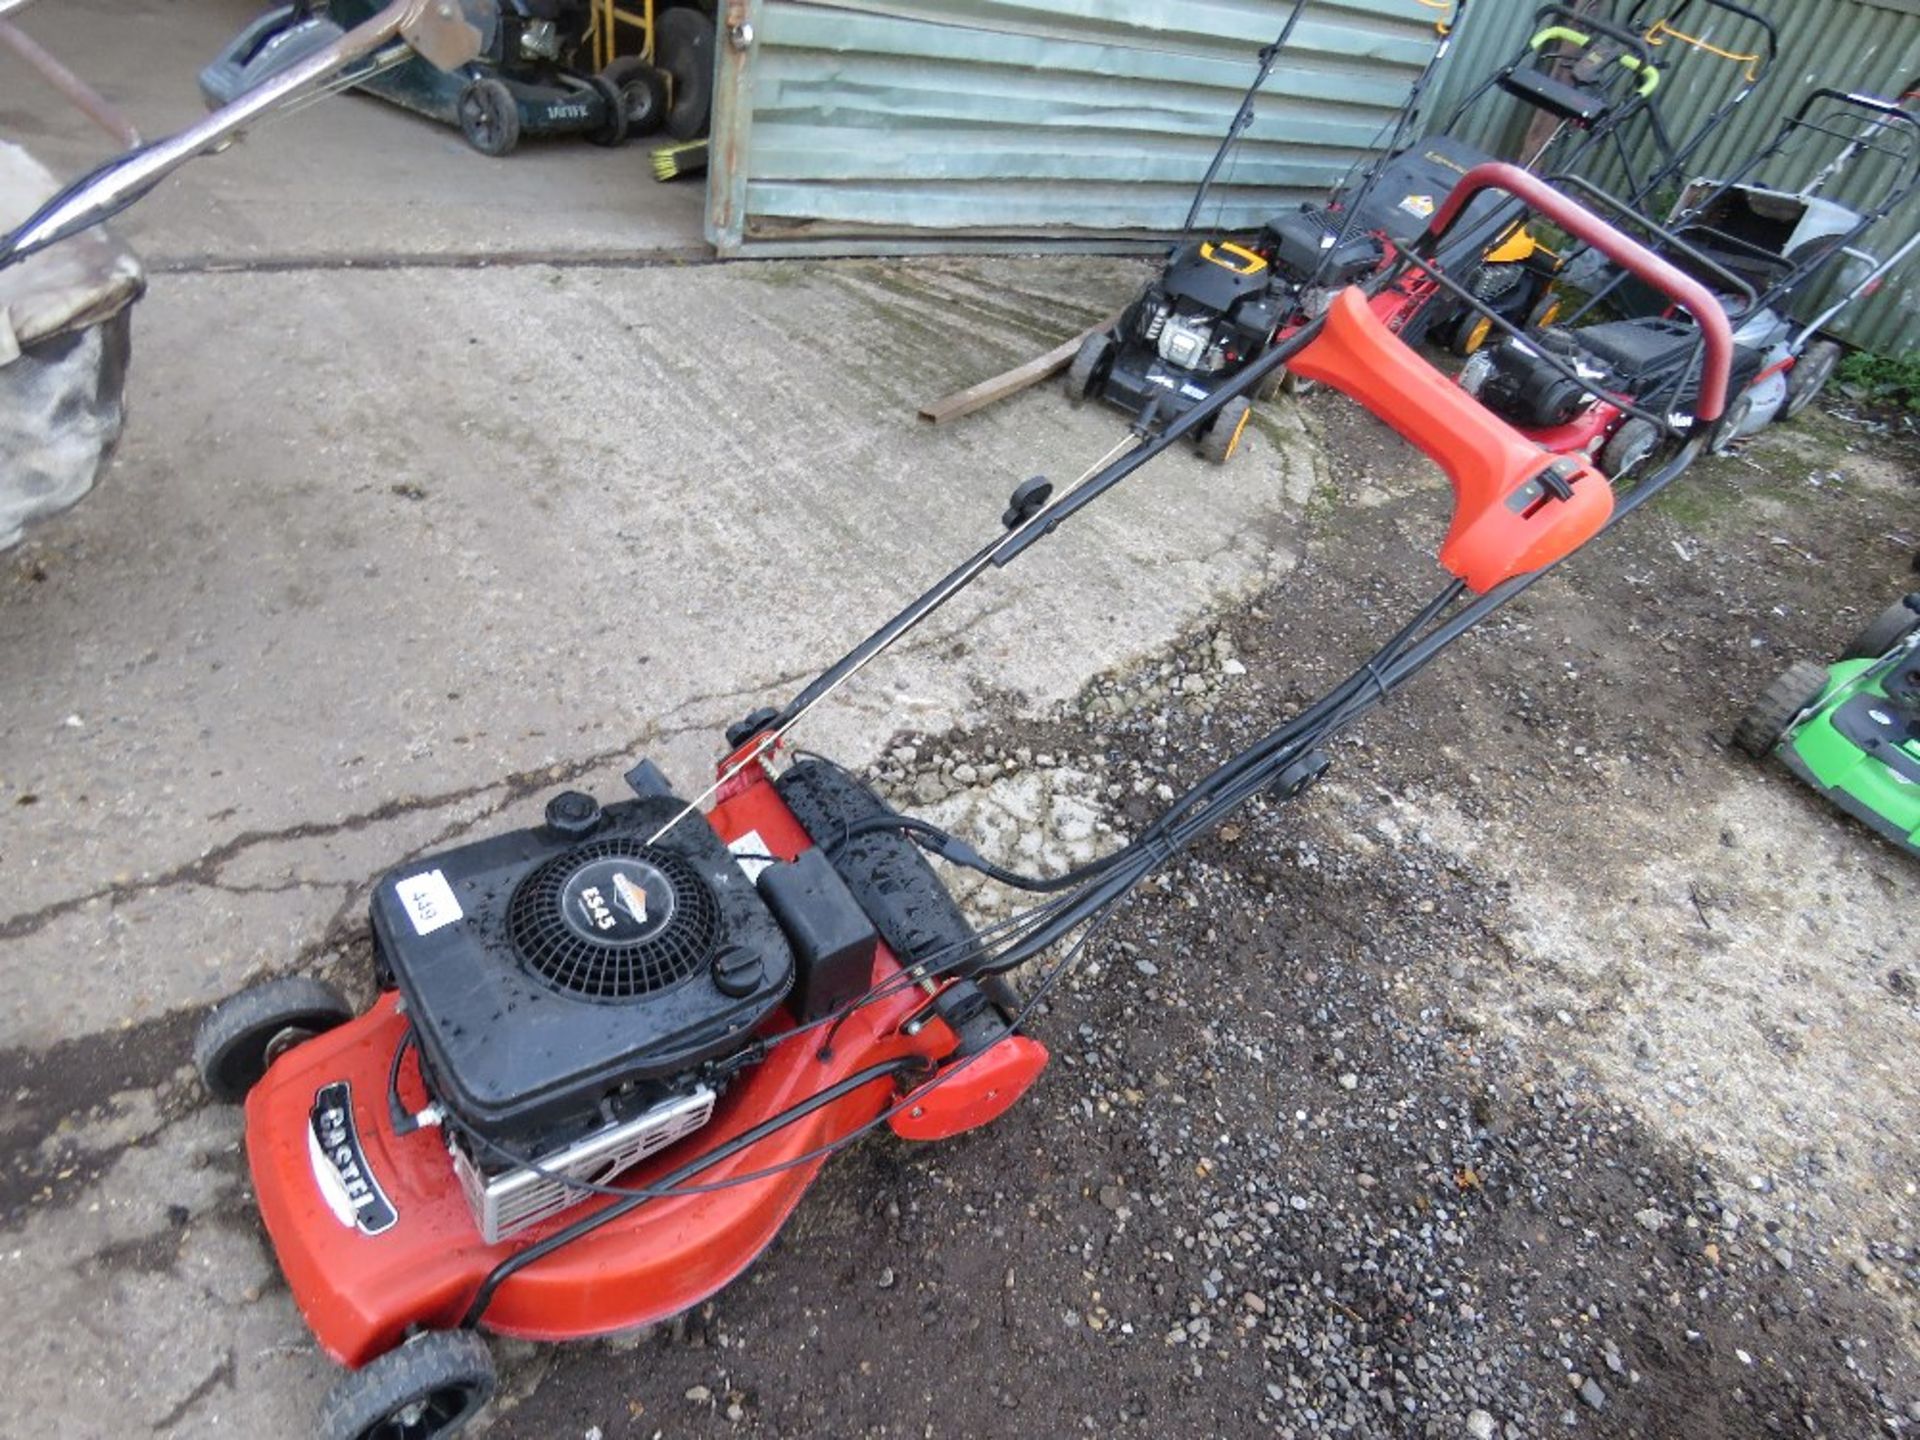 CASTEL ROLLER PETROL ENGINED ROTARY LAWNMOWER. NO COLLECTOR. THIS LOT IS SOLD UNDER THE AUCTION - Image 2 of 3